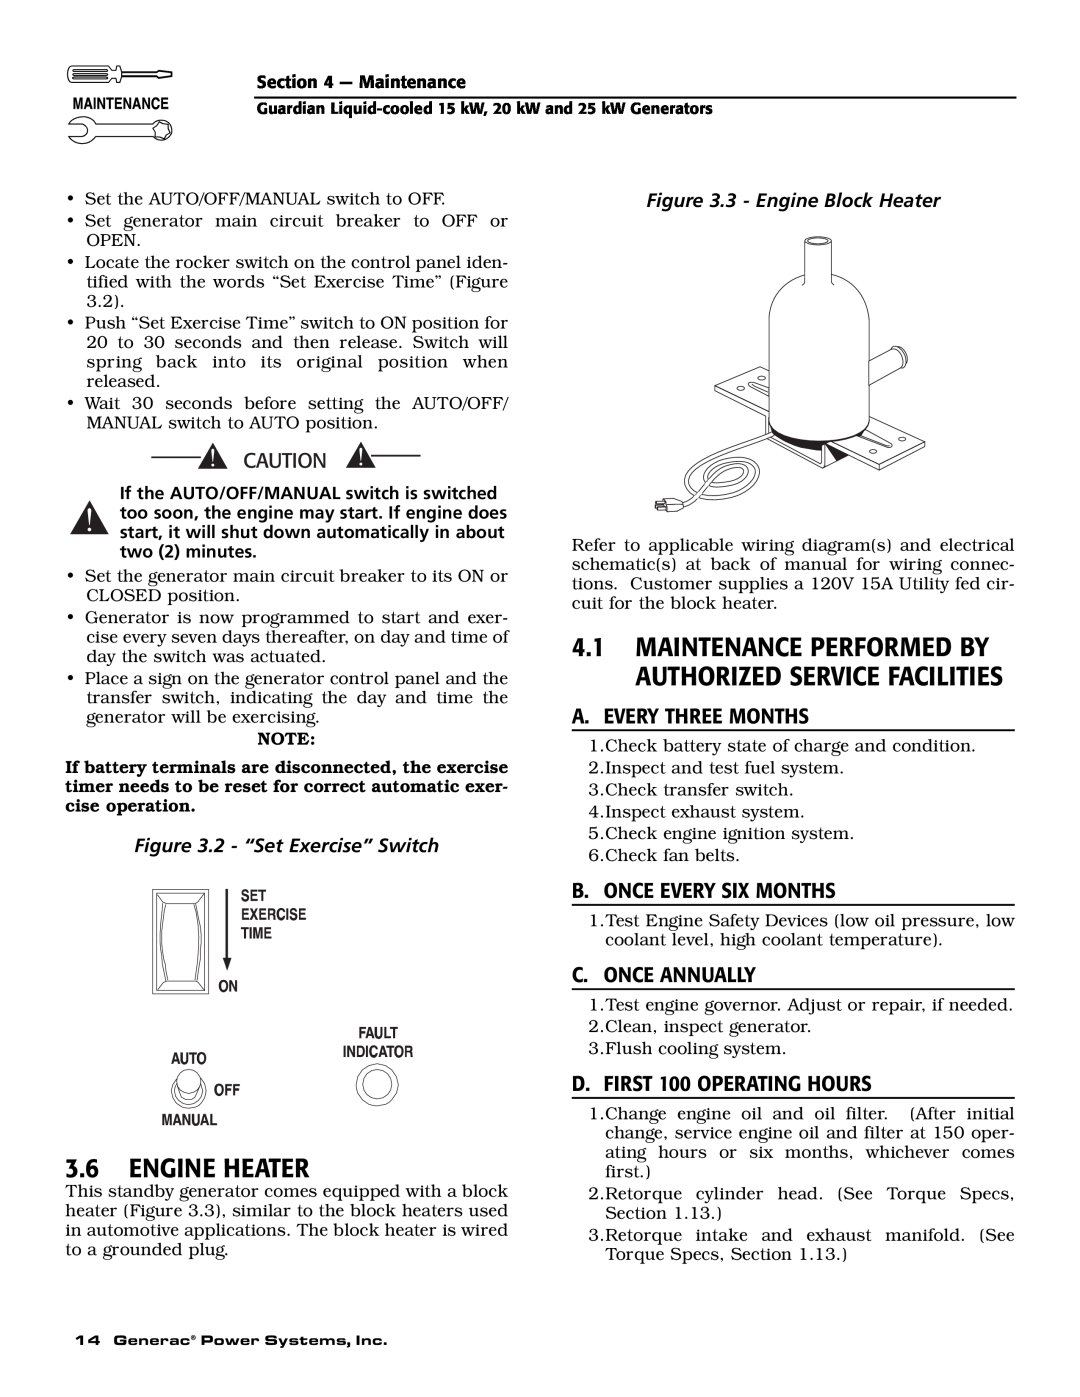 Guardian Technologies 004721-0 Engine Heater, Maintenance Performed By Authorized Service Facilities, C. Once Annually 